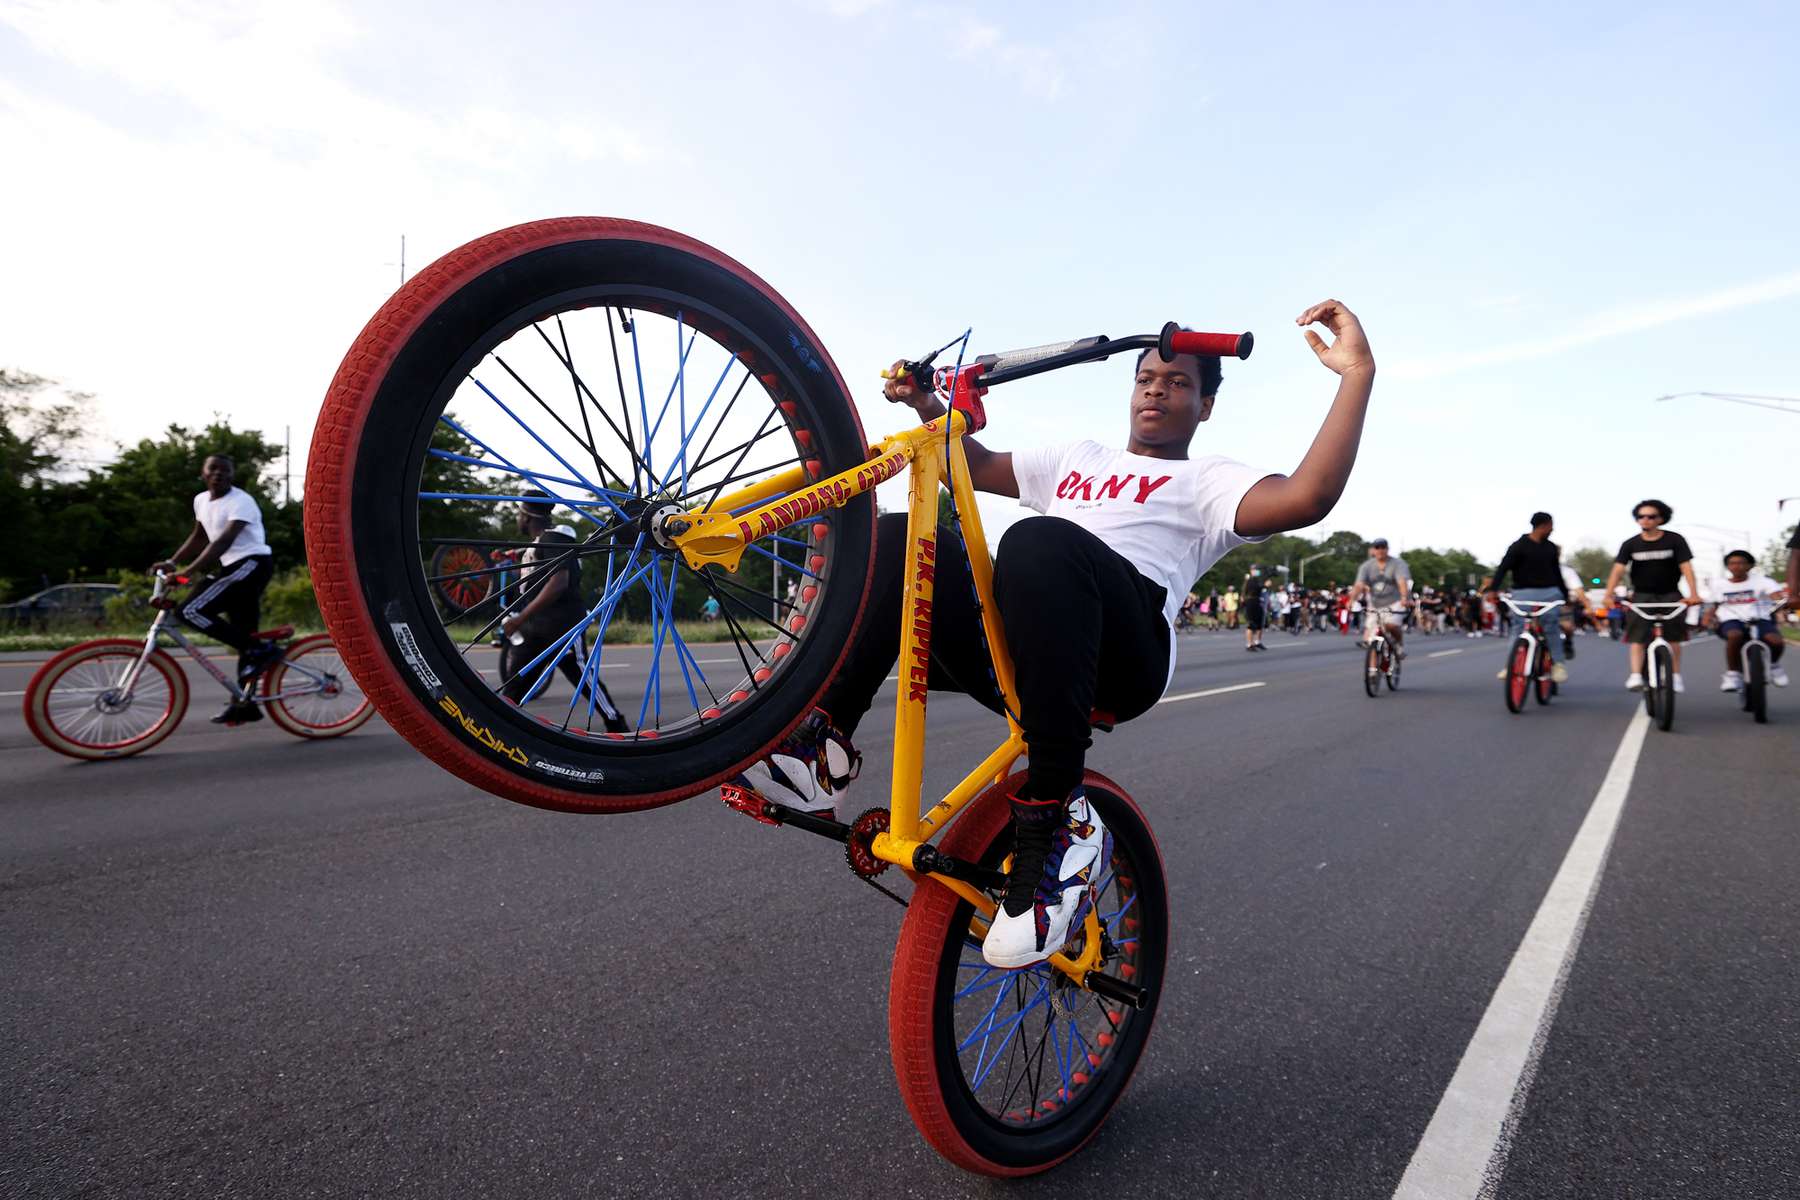 A Protester pops a wheelie on his bicycle to demonstrate the death of George Floyd on June 04, 2020 in Merrick, New York.  Minneapolis Police officer Derek Chauvin was filmed kneeling on George Floyd's neck. Floyd was later pronounced dead at a local hospital. Across the country, protests against Floyd's death have set off days and nights of rage as its the most recent in a series of deaths of black Americans by the police.  